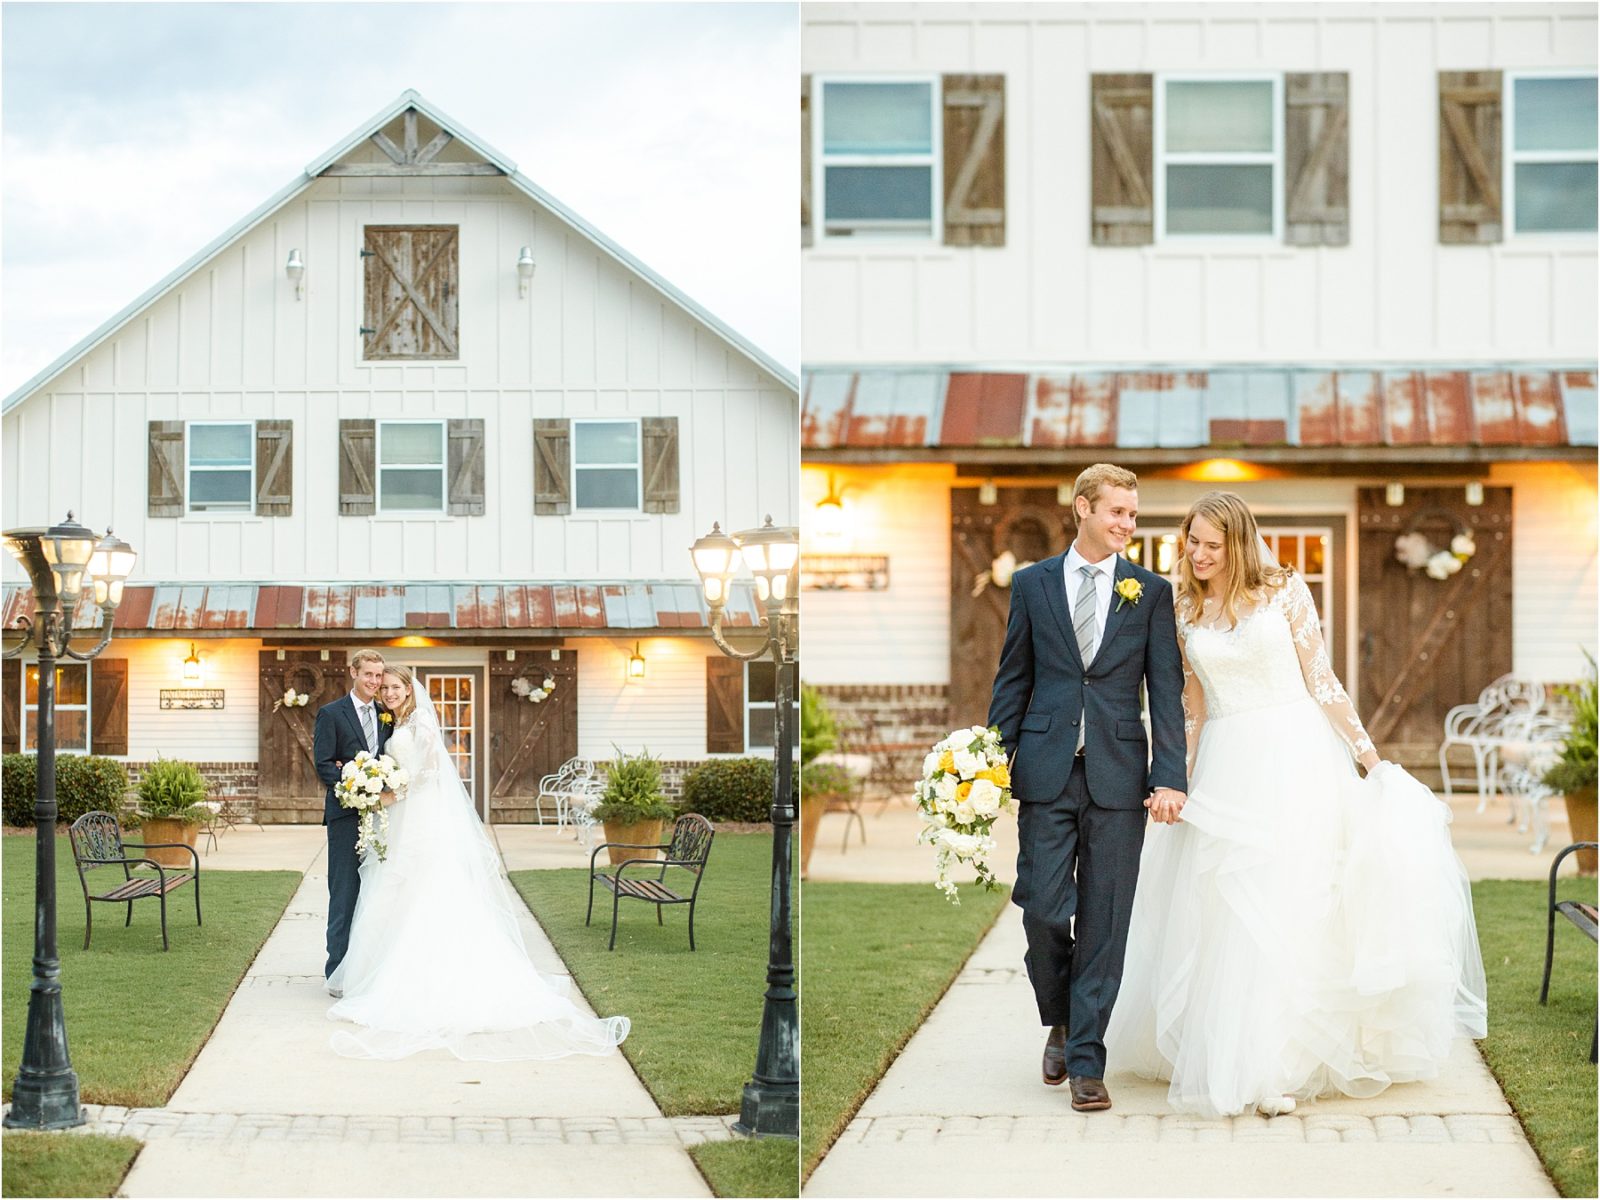 Georgia bride and groom in front of barn